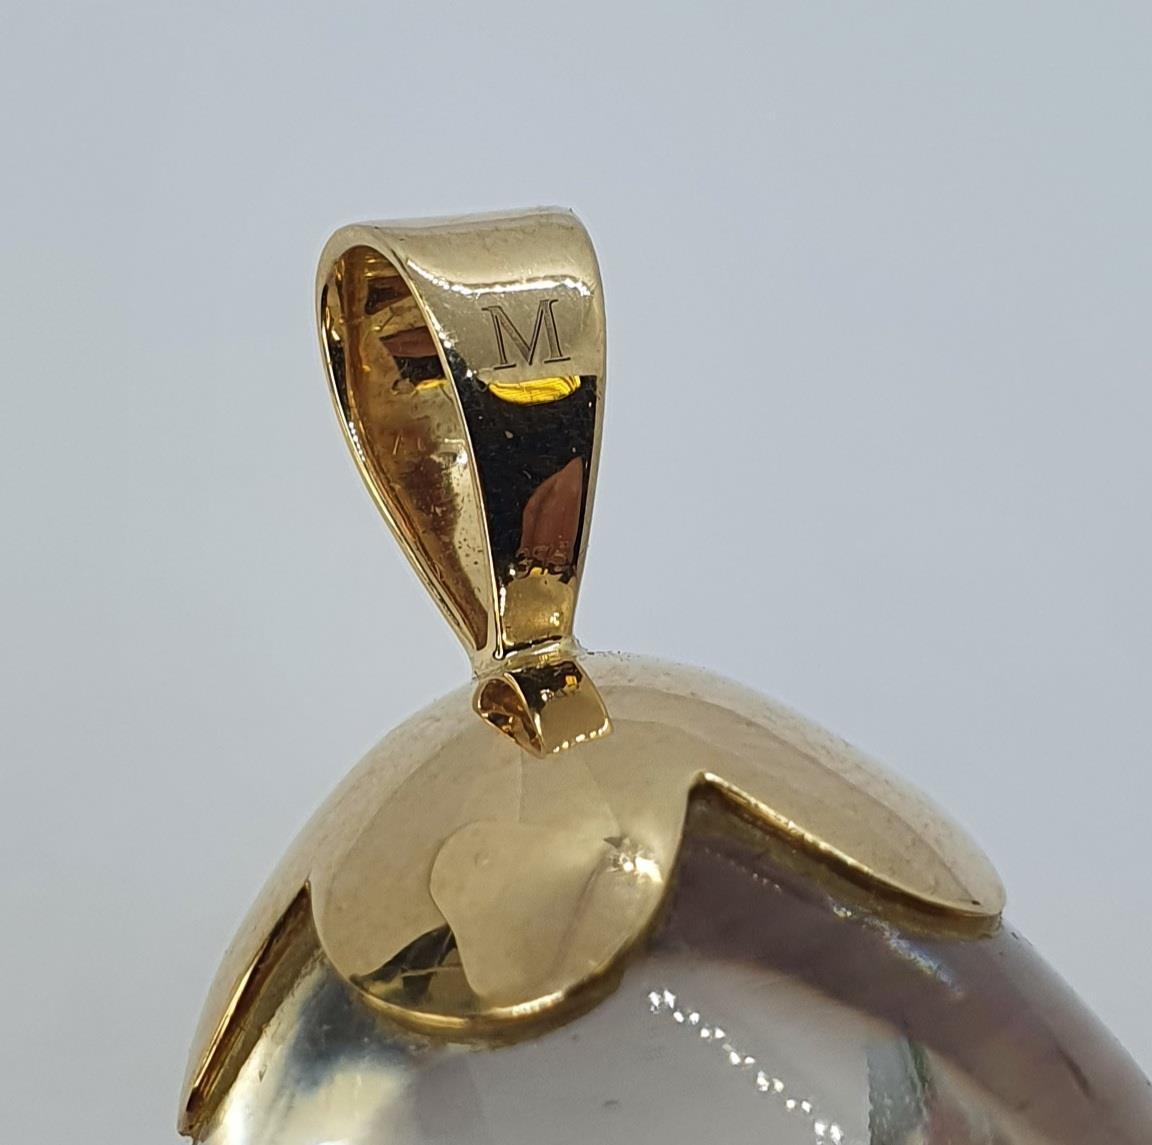 A pear shaped rock crystal pendant, with a yellow coloured metal suspension, 5.5 cm high Flawed/ - Image 2 of 2